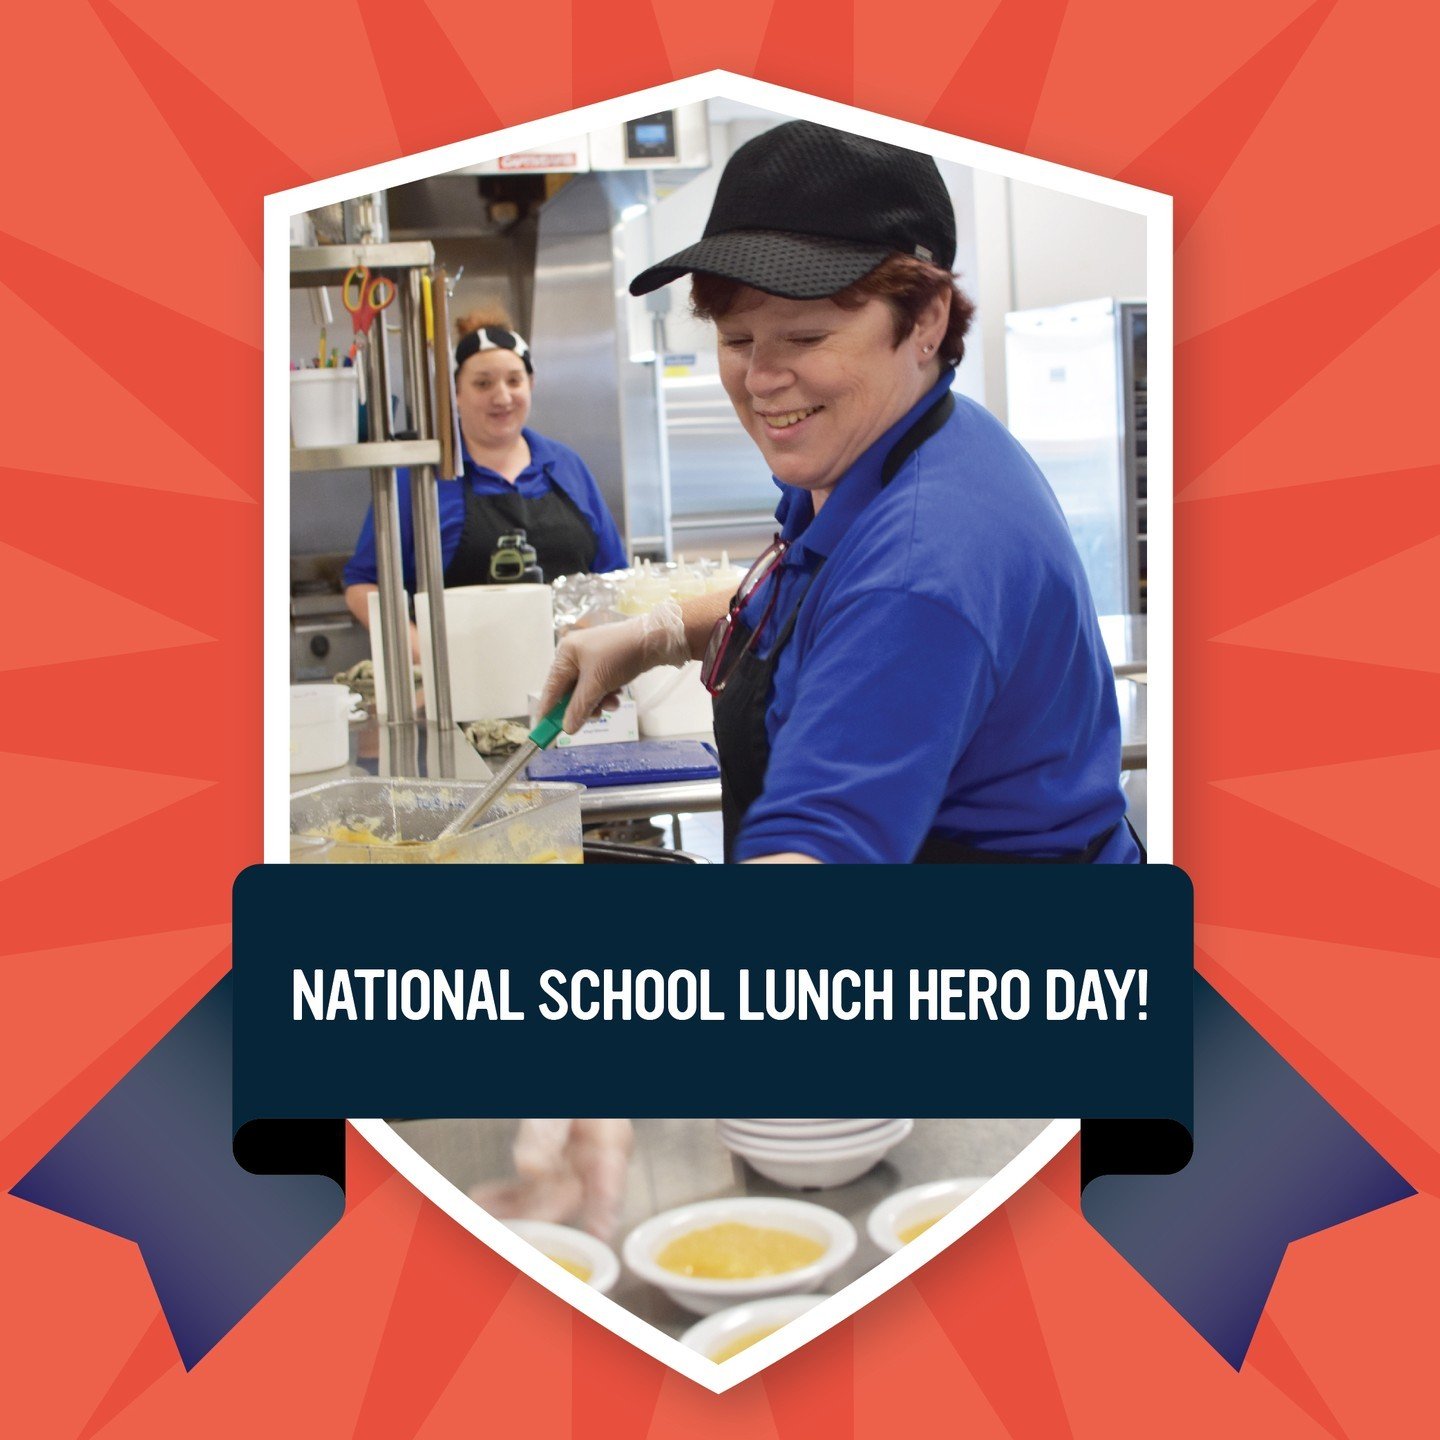 🌟 When we say school nutrition professionals are heroes, we mean it! 🌟

School nutrition professionals play a vital role in shaping the lives of students by serving meals and making sure students are well-nourished and ready to focus in the classro